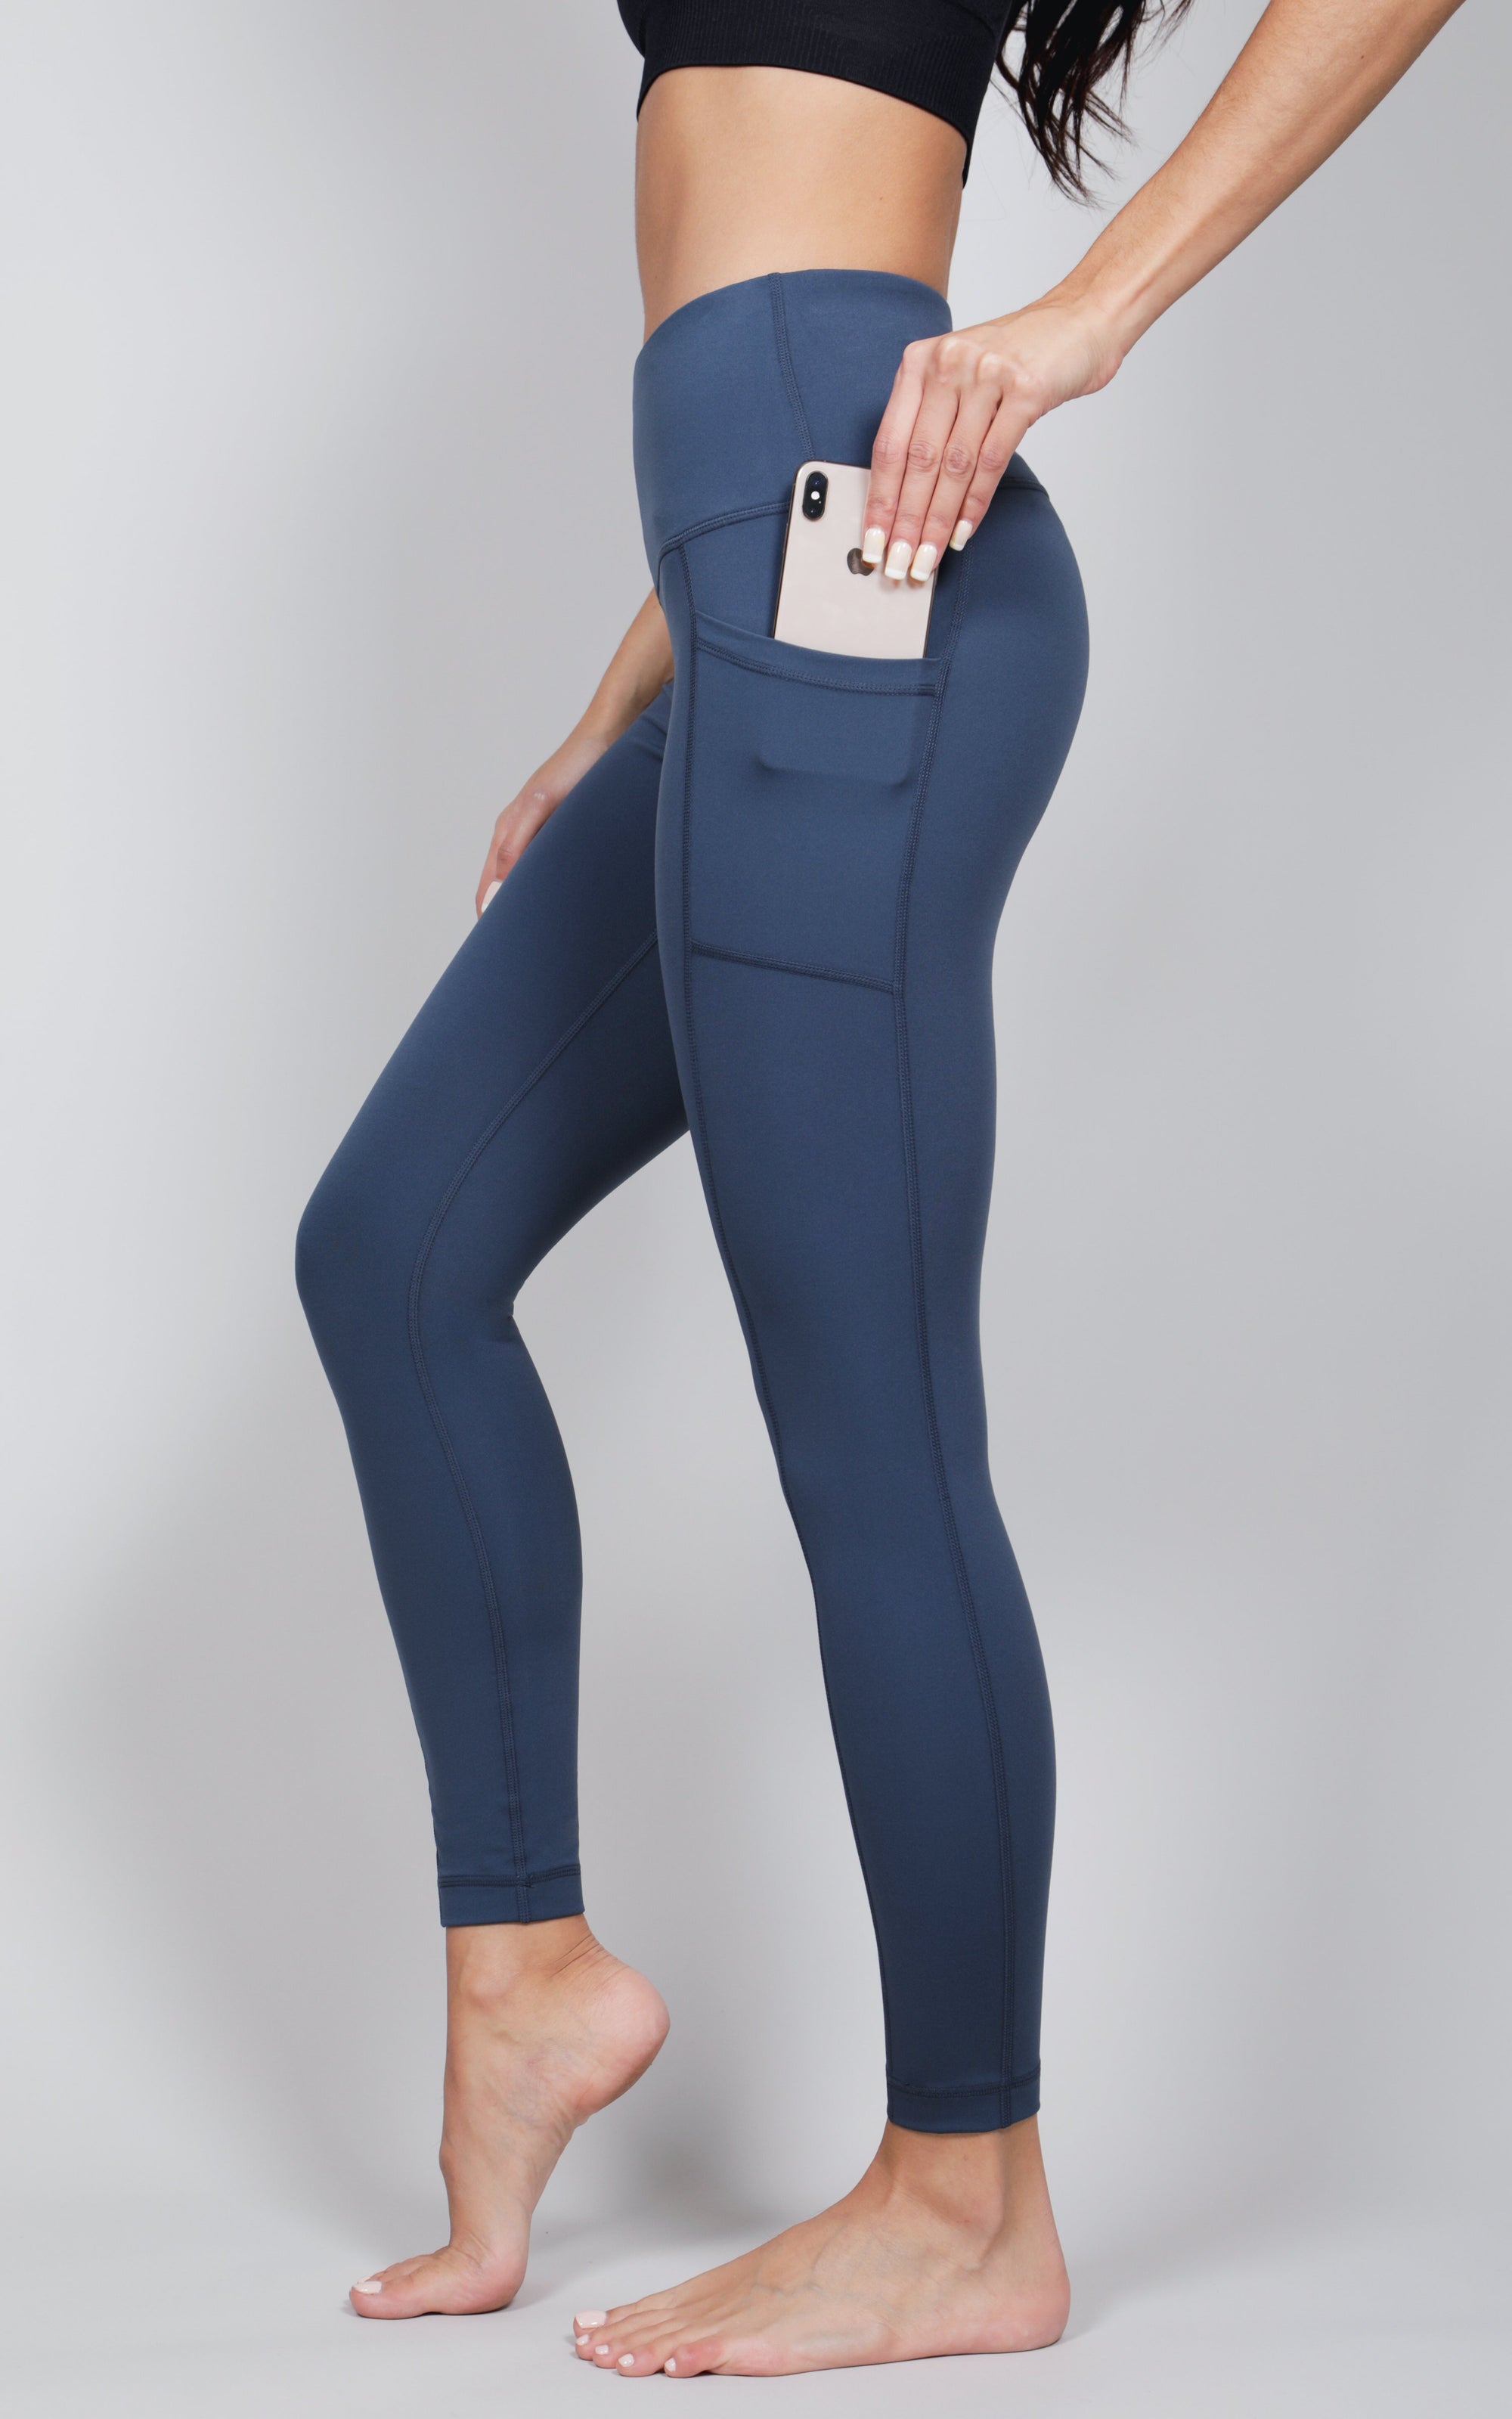 Yoga Licious Lux High Waist, Ankle Legging with Side Pockets